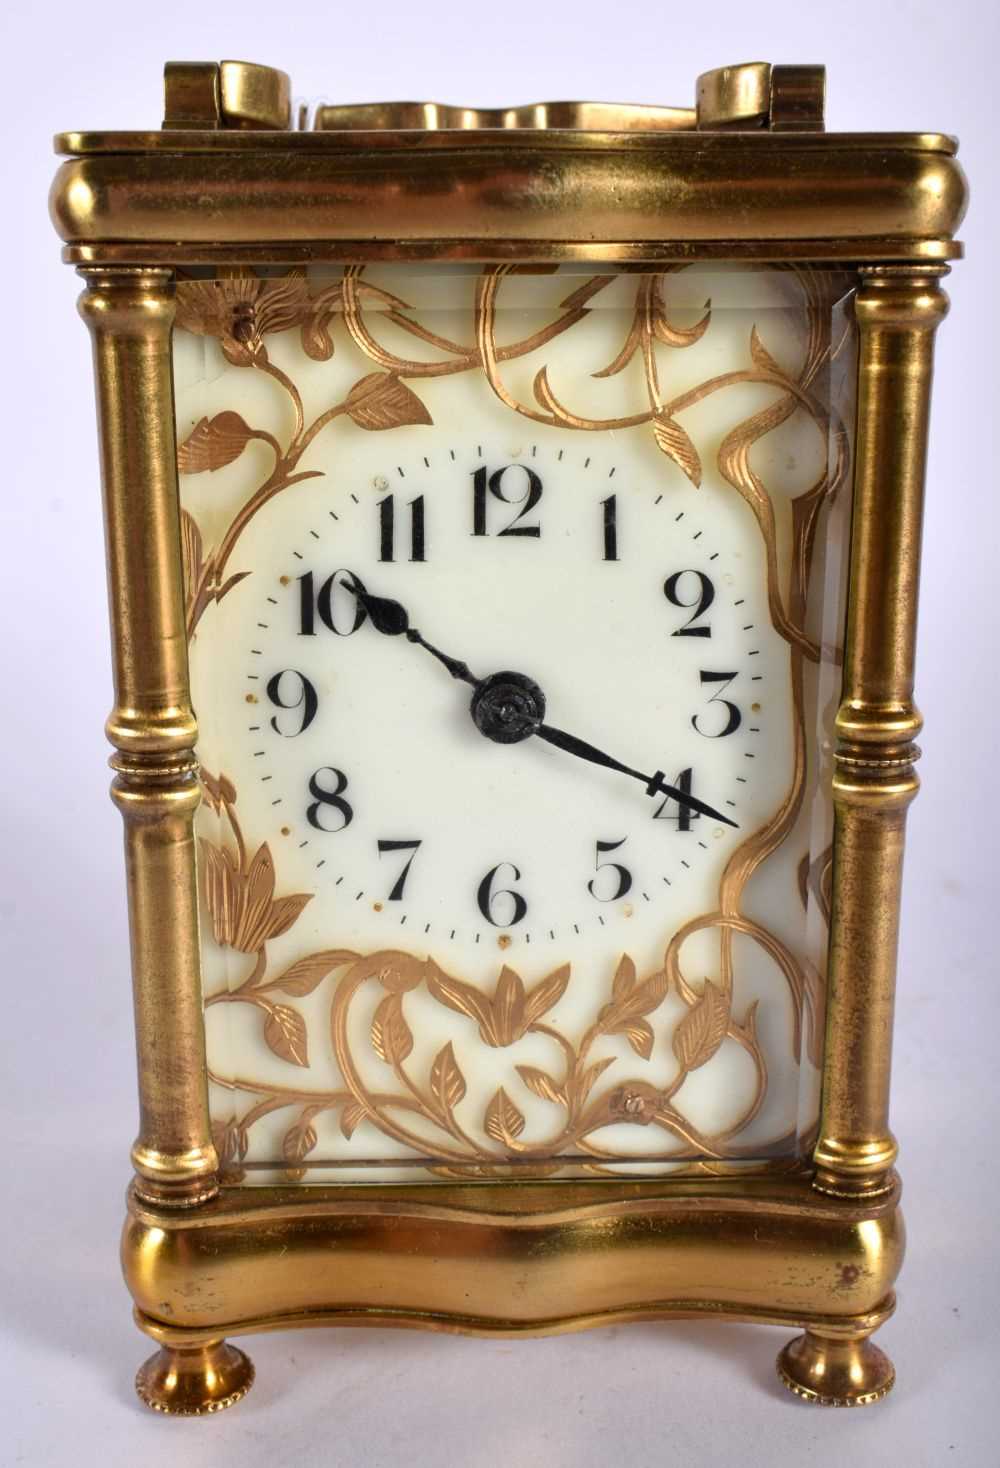 A CASED ANTIQUE BRASS CARRIAGE CLOCK. 14.5 cm high inc handle. - Image 2 of 7